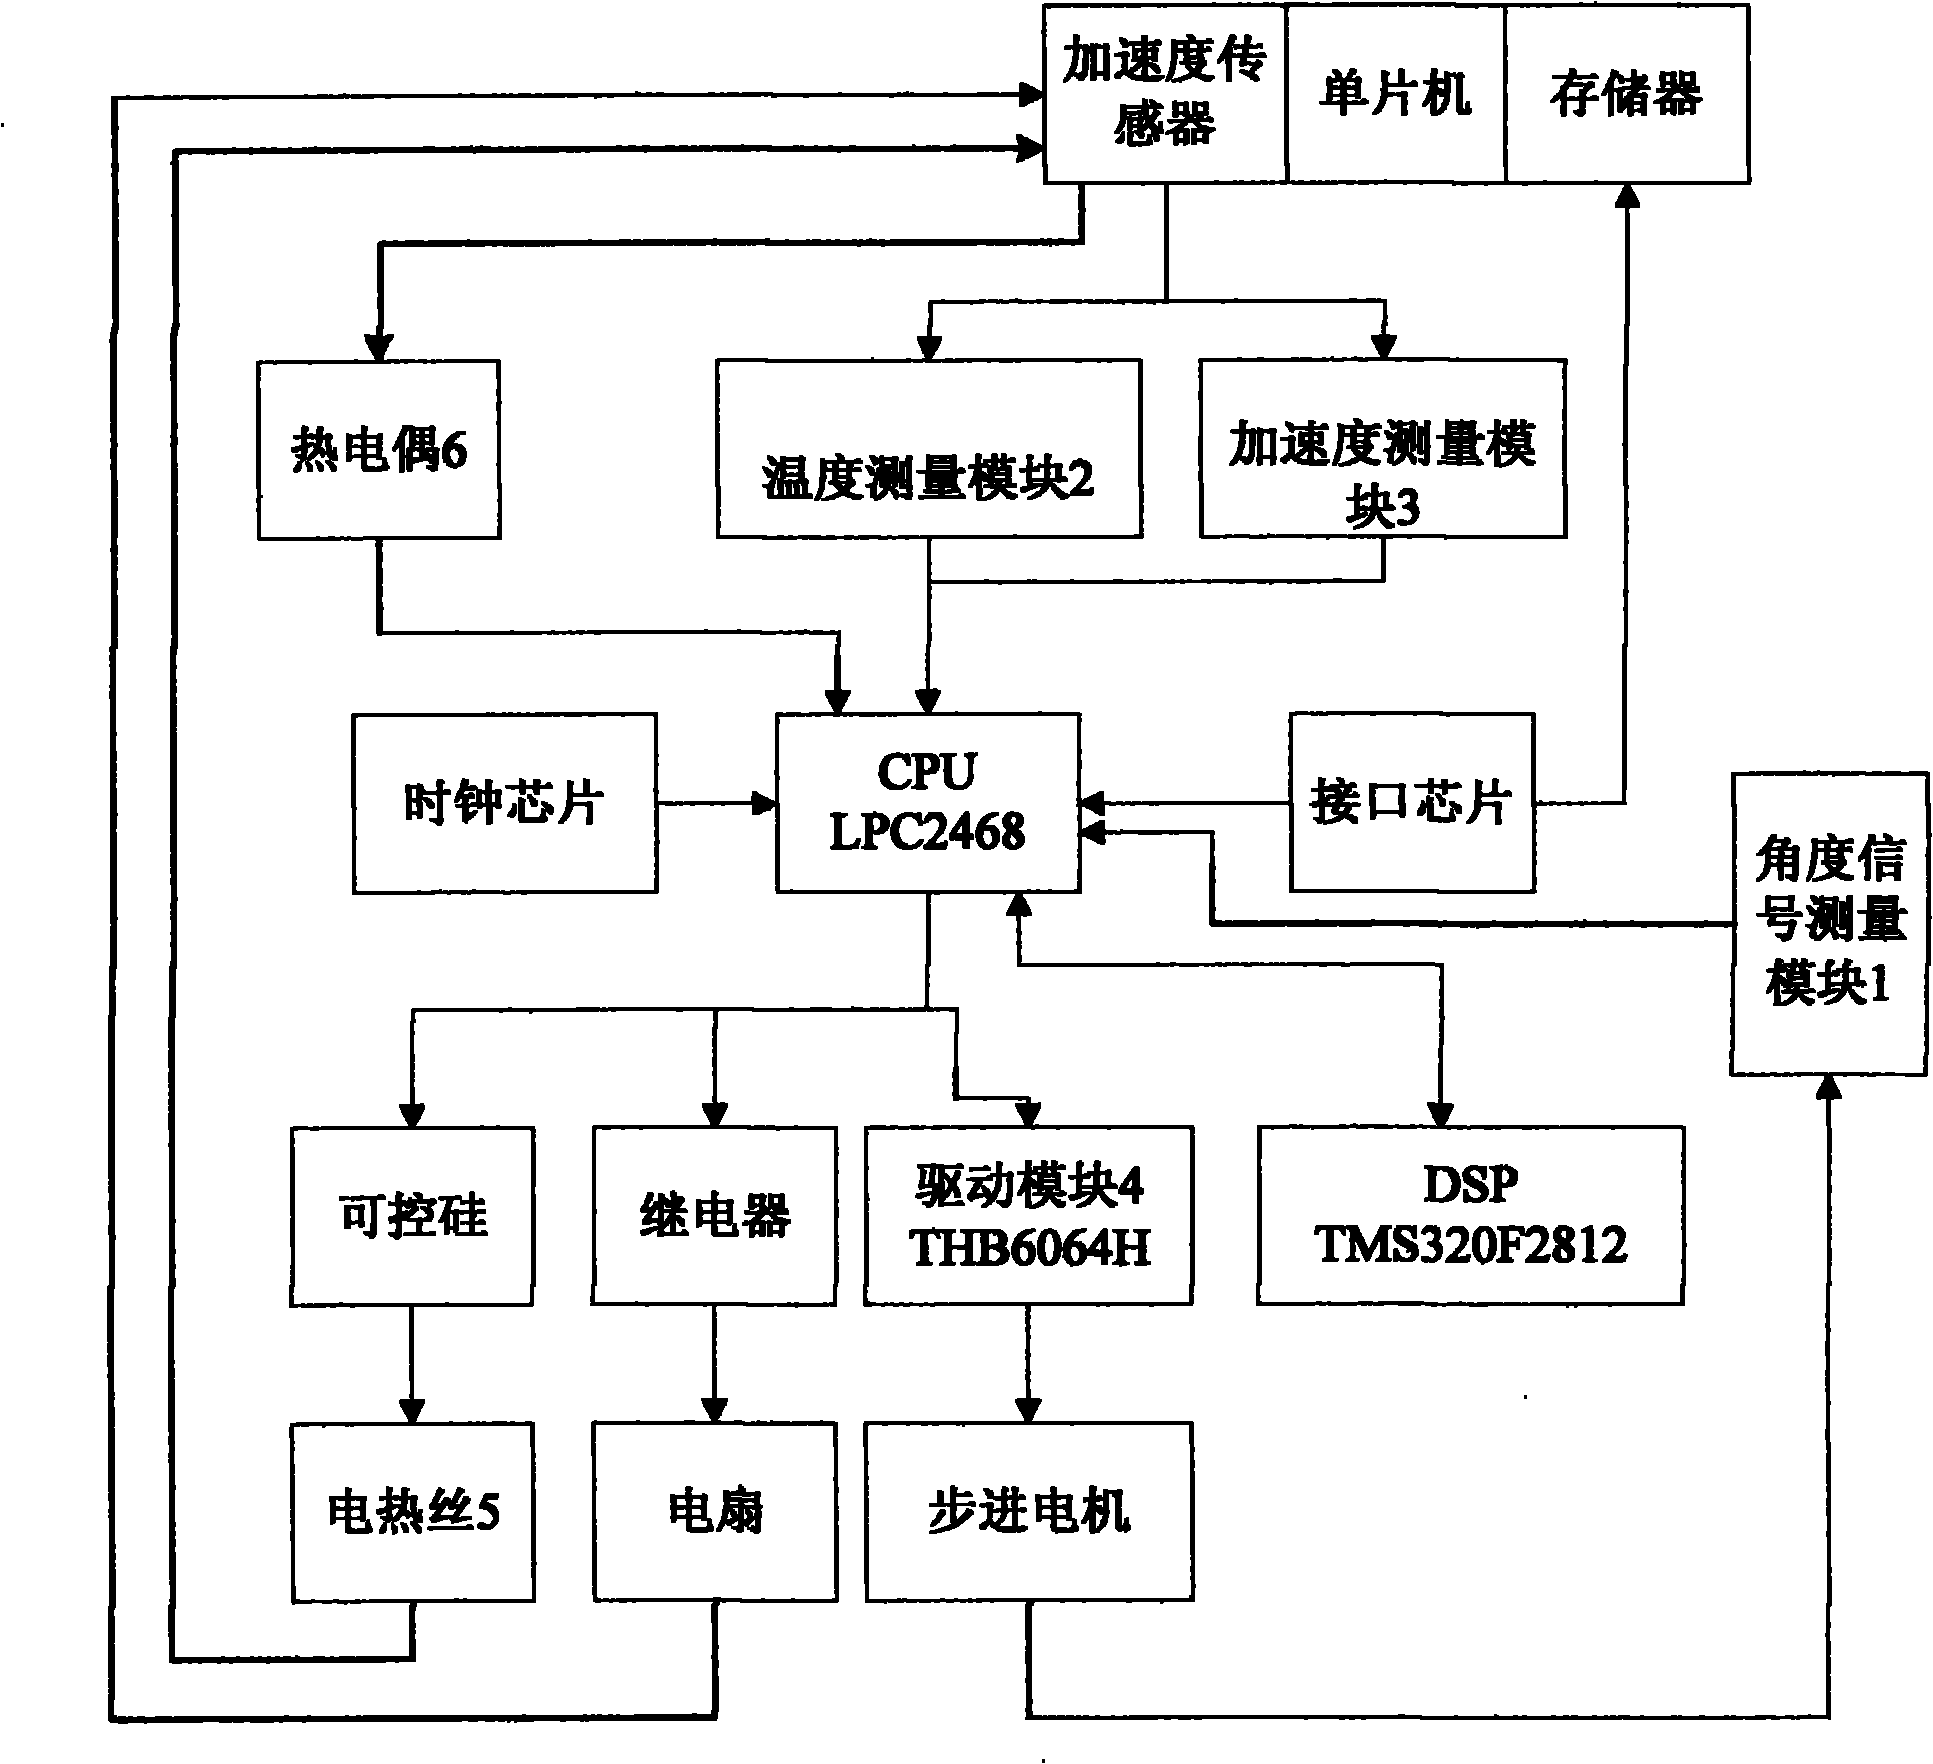 Full-automatic correction system for acceleration sensor